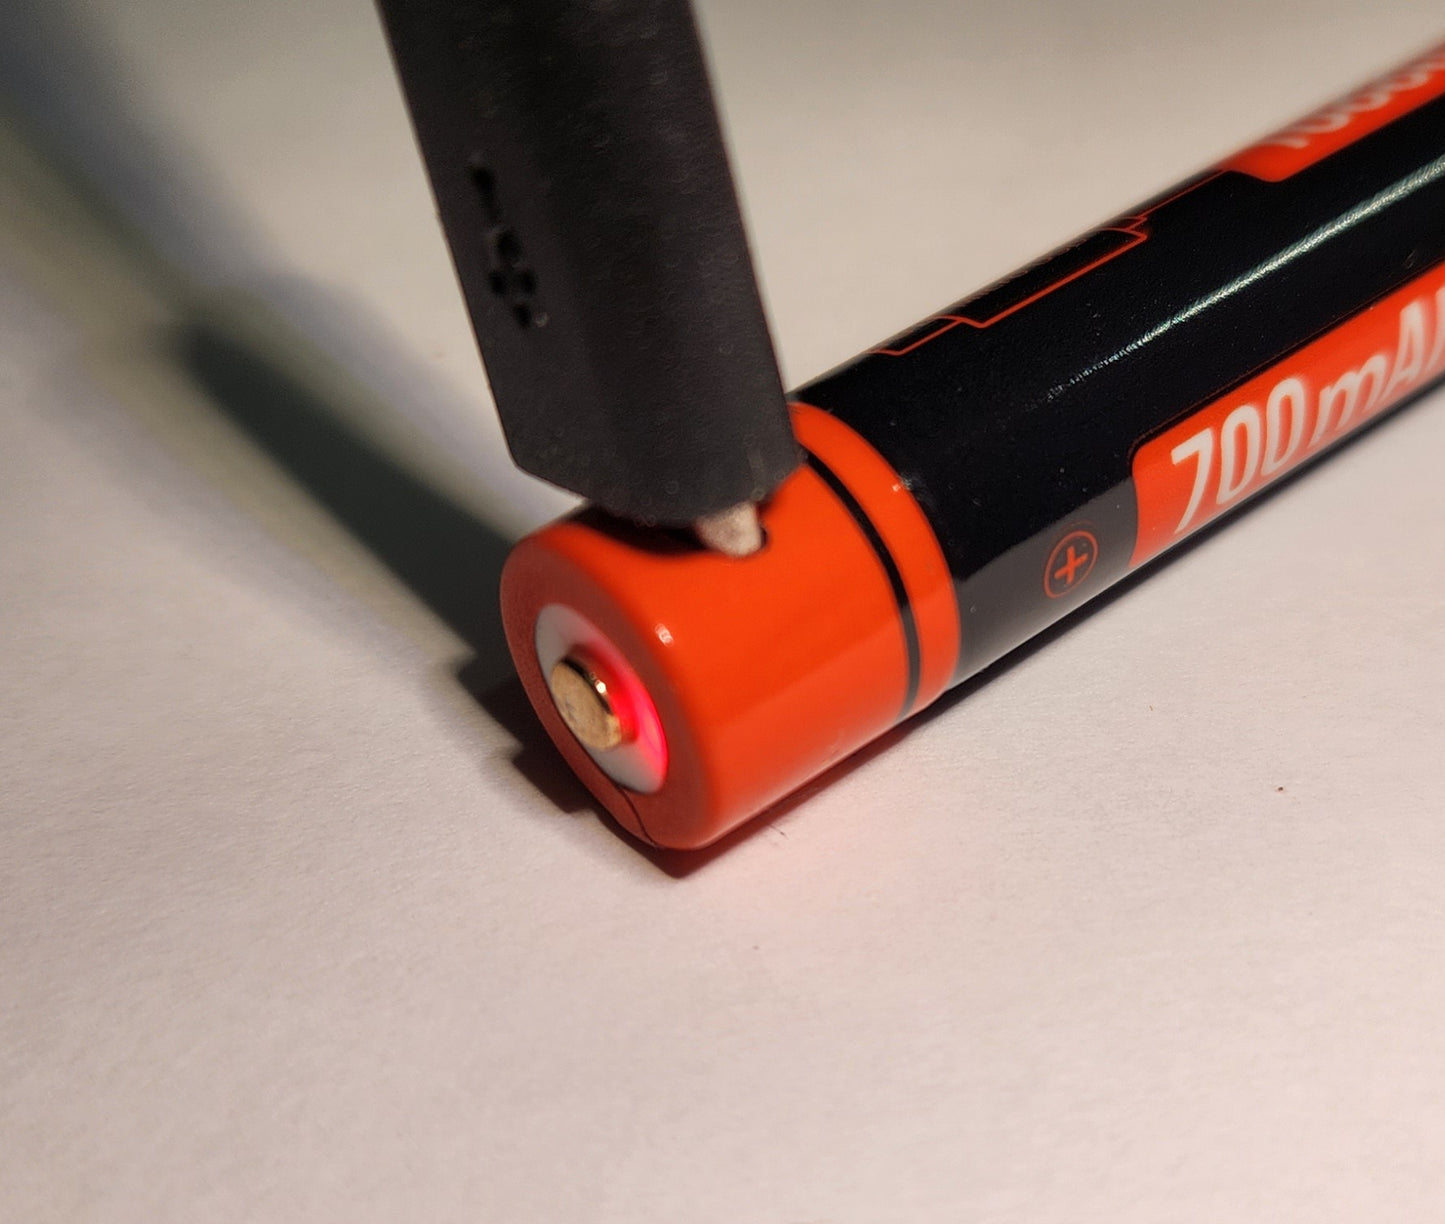 Vapcell 10880 3.0V 700mAh Rechargeable Lithium Battery W/USB **** HAS TO BE SHIPPED WITH FLASHLIGHT + FEDEX ***